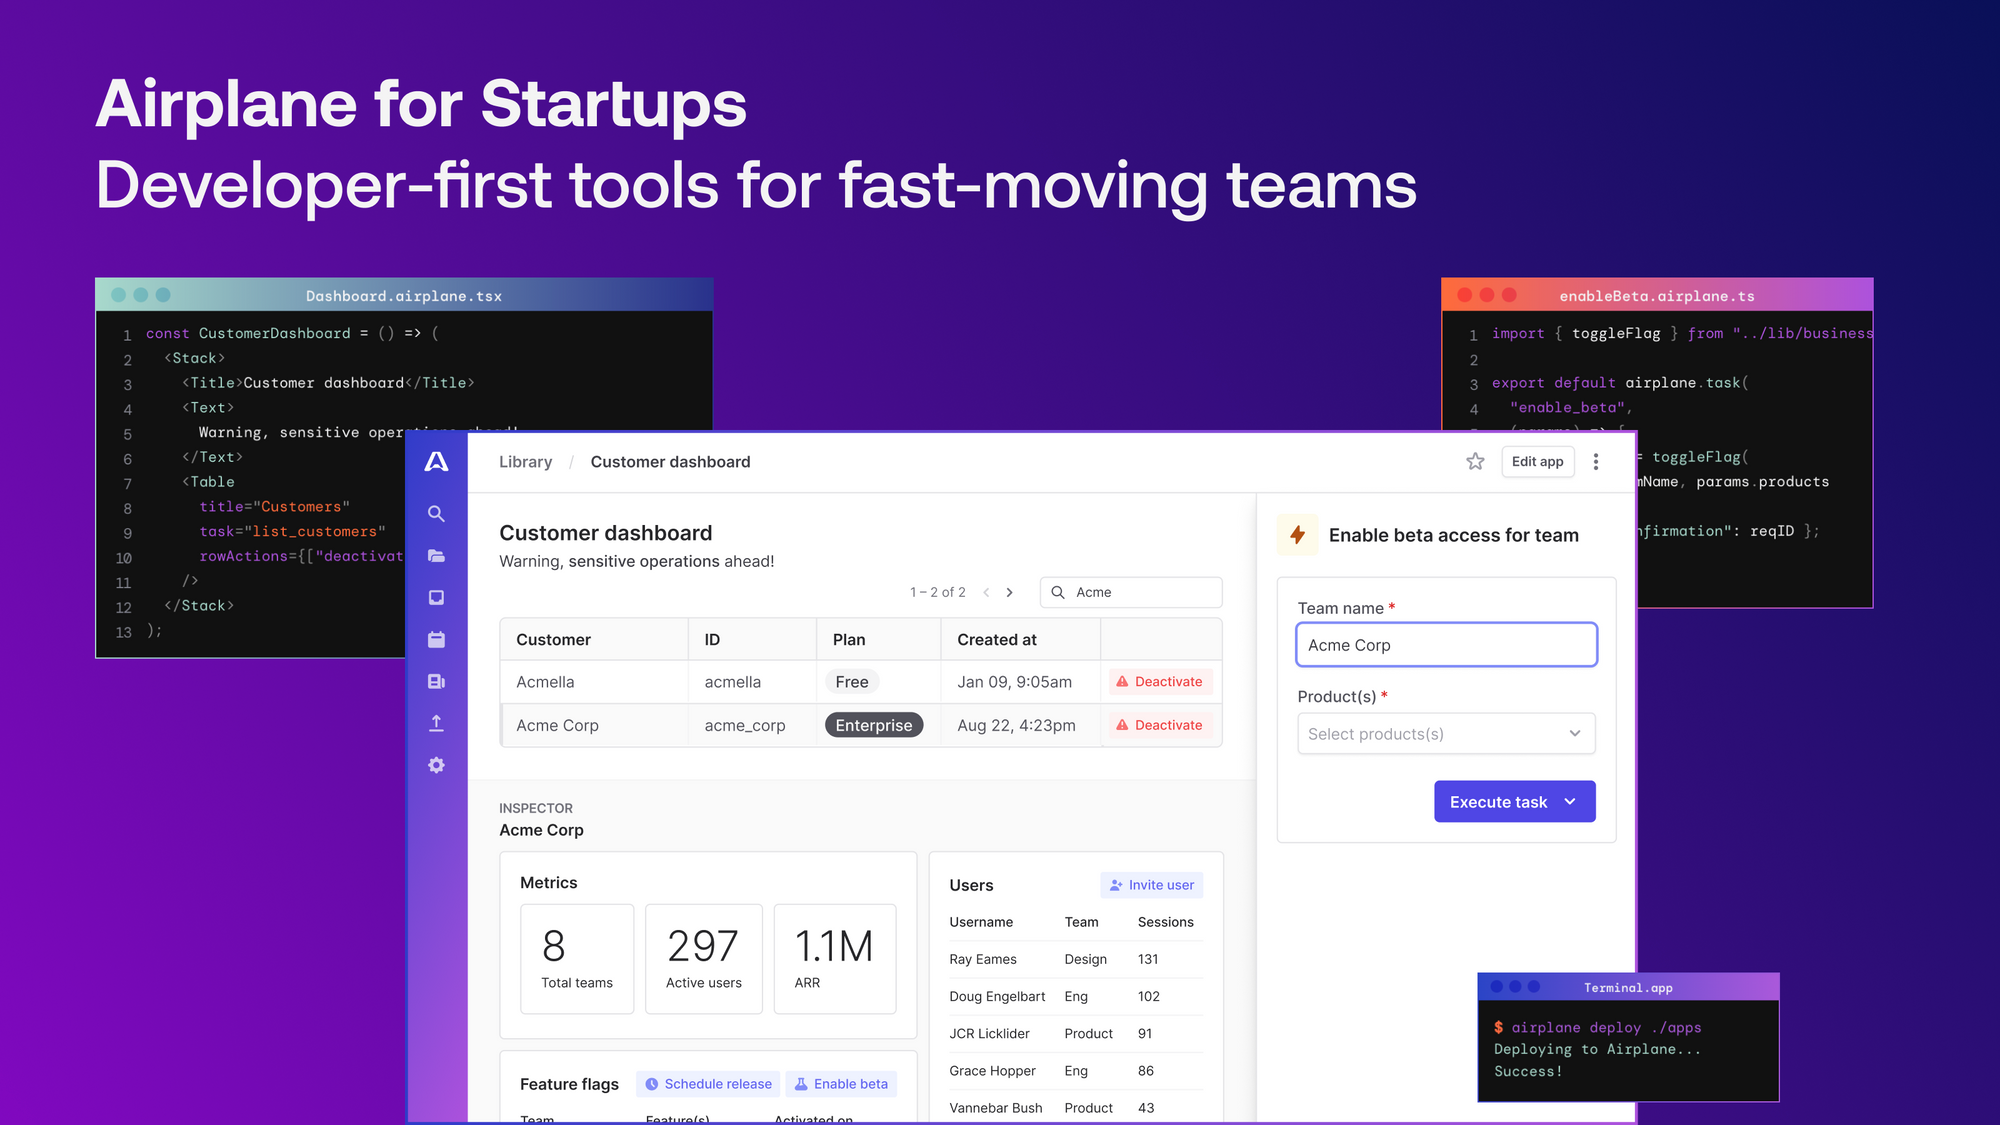 Introducing Airplane for Startups